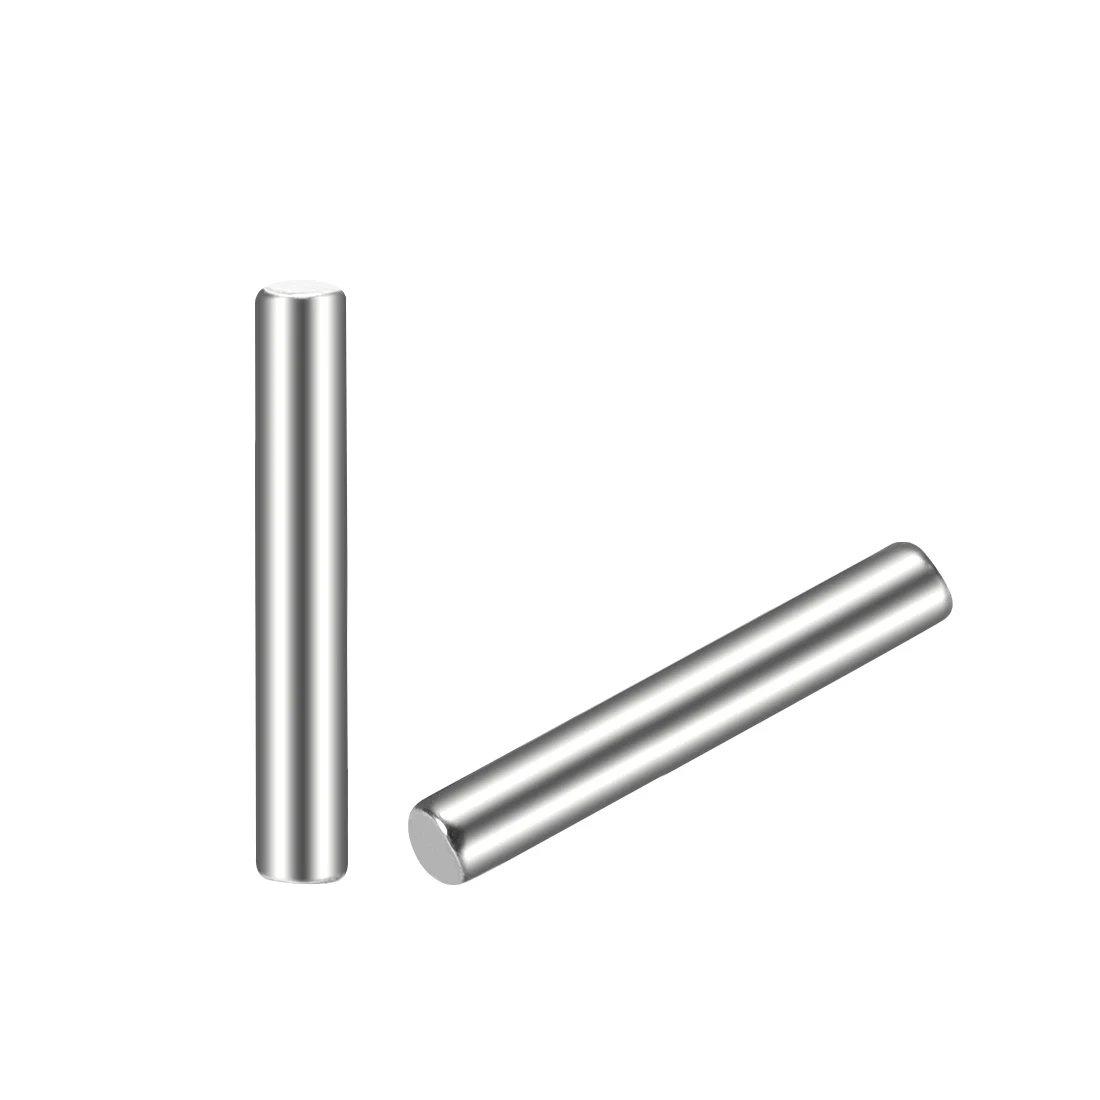 sourcing map 20Pcs 5mm x 20mm Dowel Pin 304 Stainless Steel Shelf Support Pin Fasten Elements Silver Tone